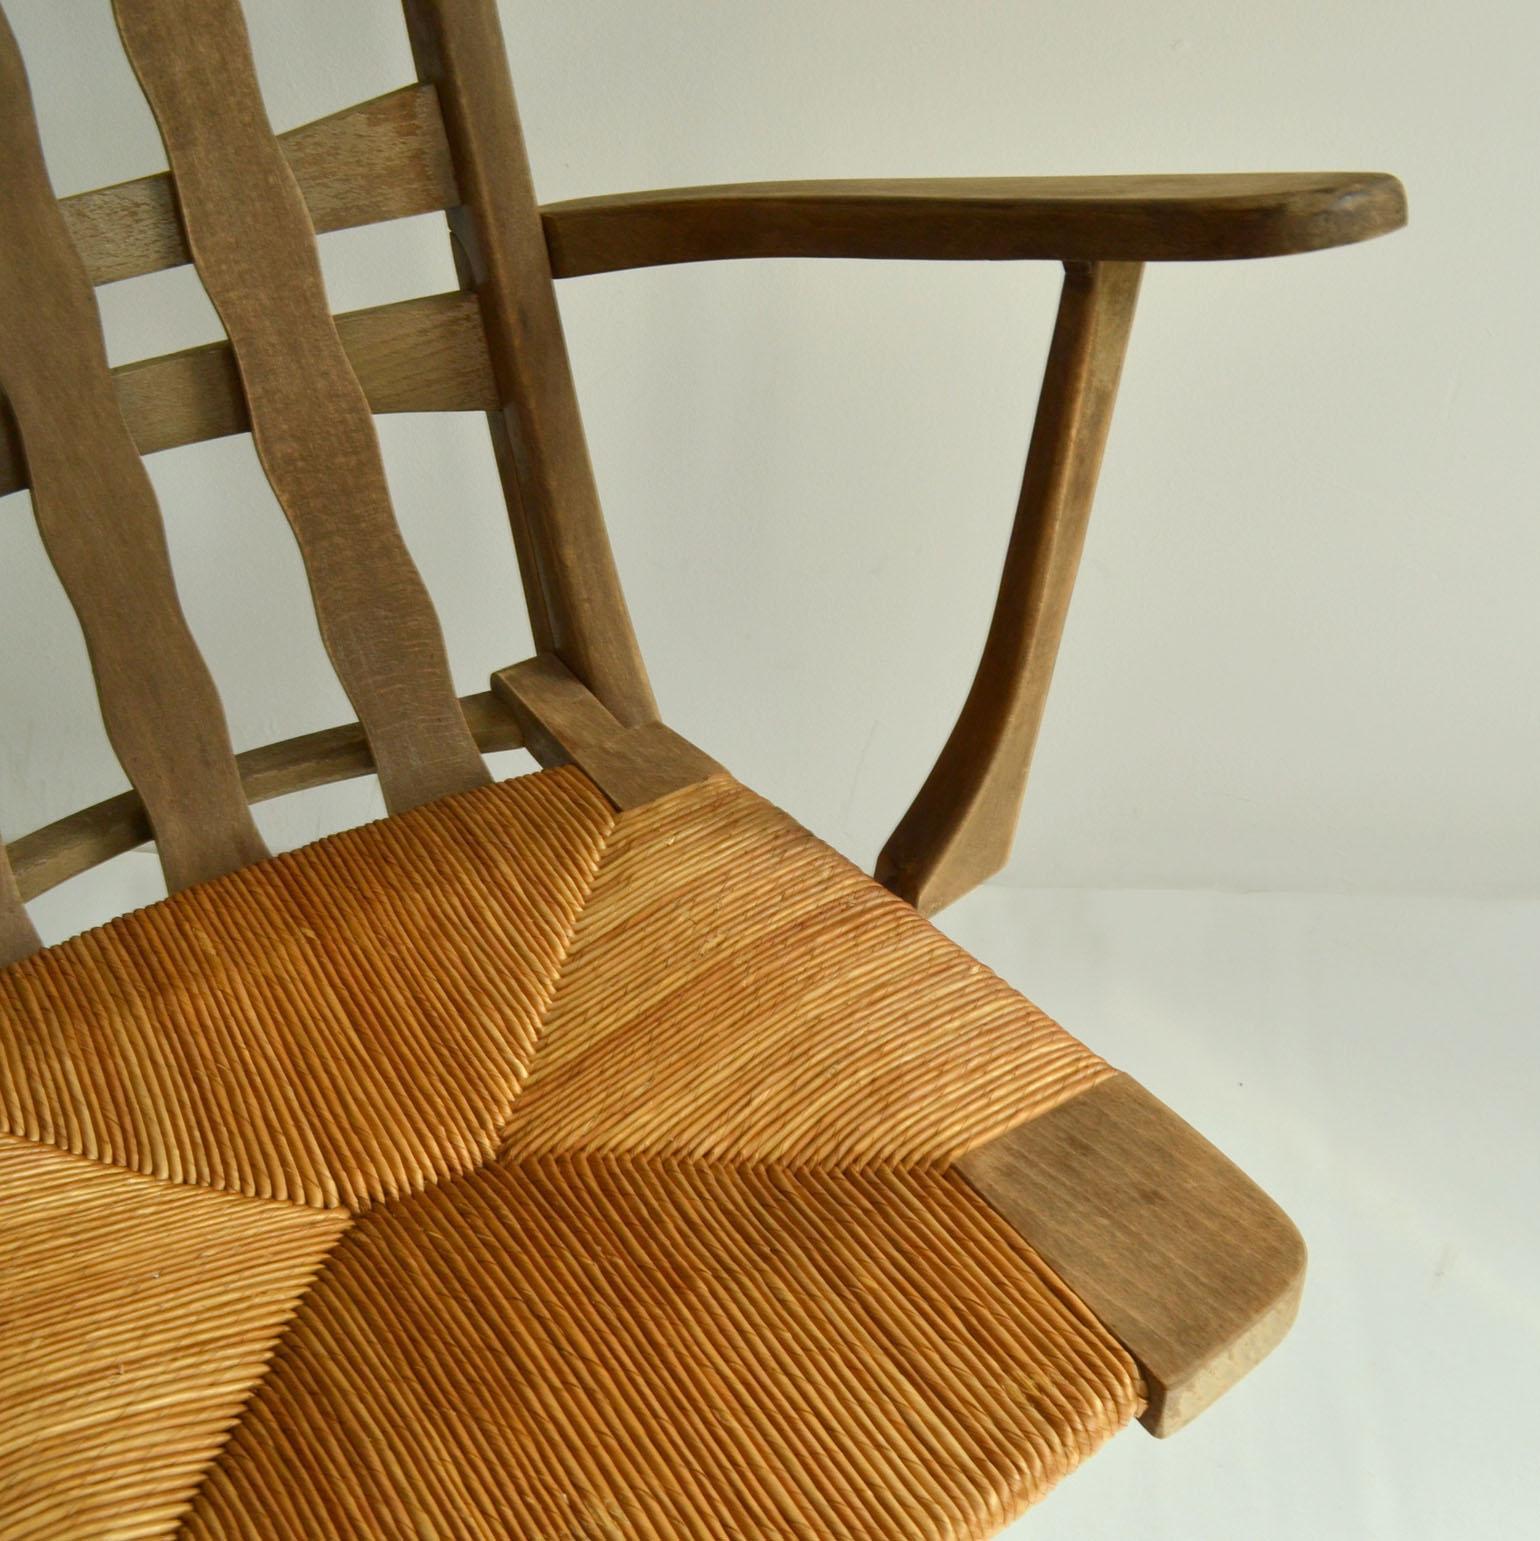 Pair of French Modernist Outdoor Oak Chairs, French, 1950s For Sale 11